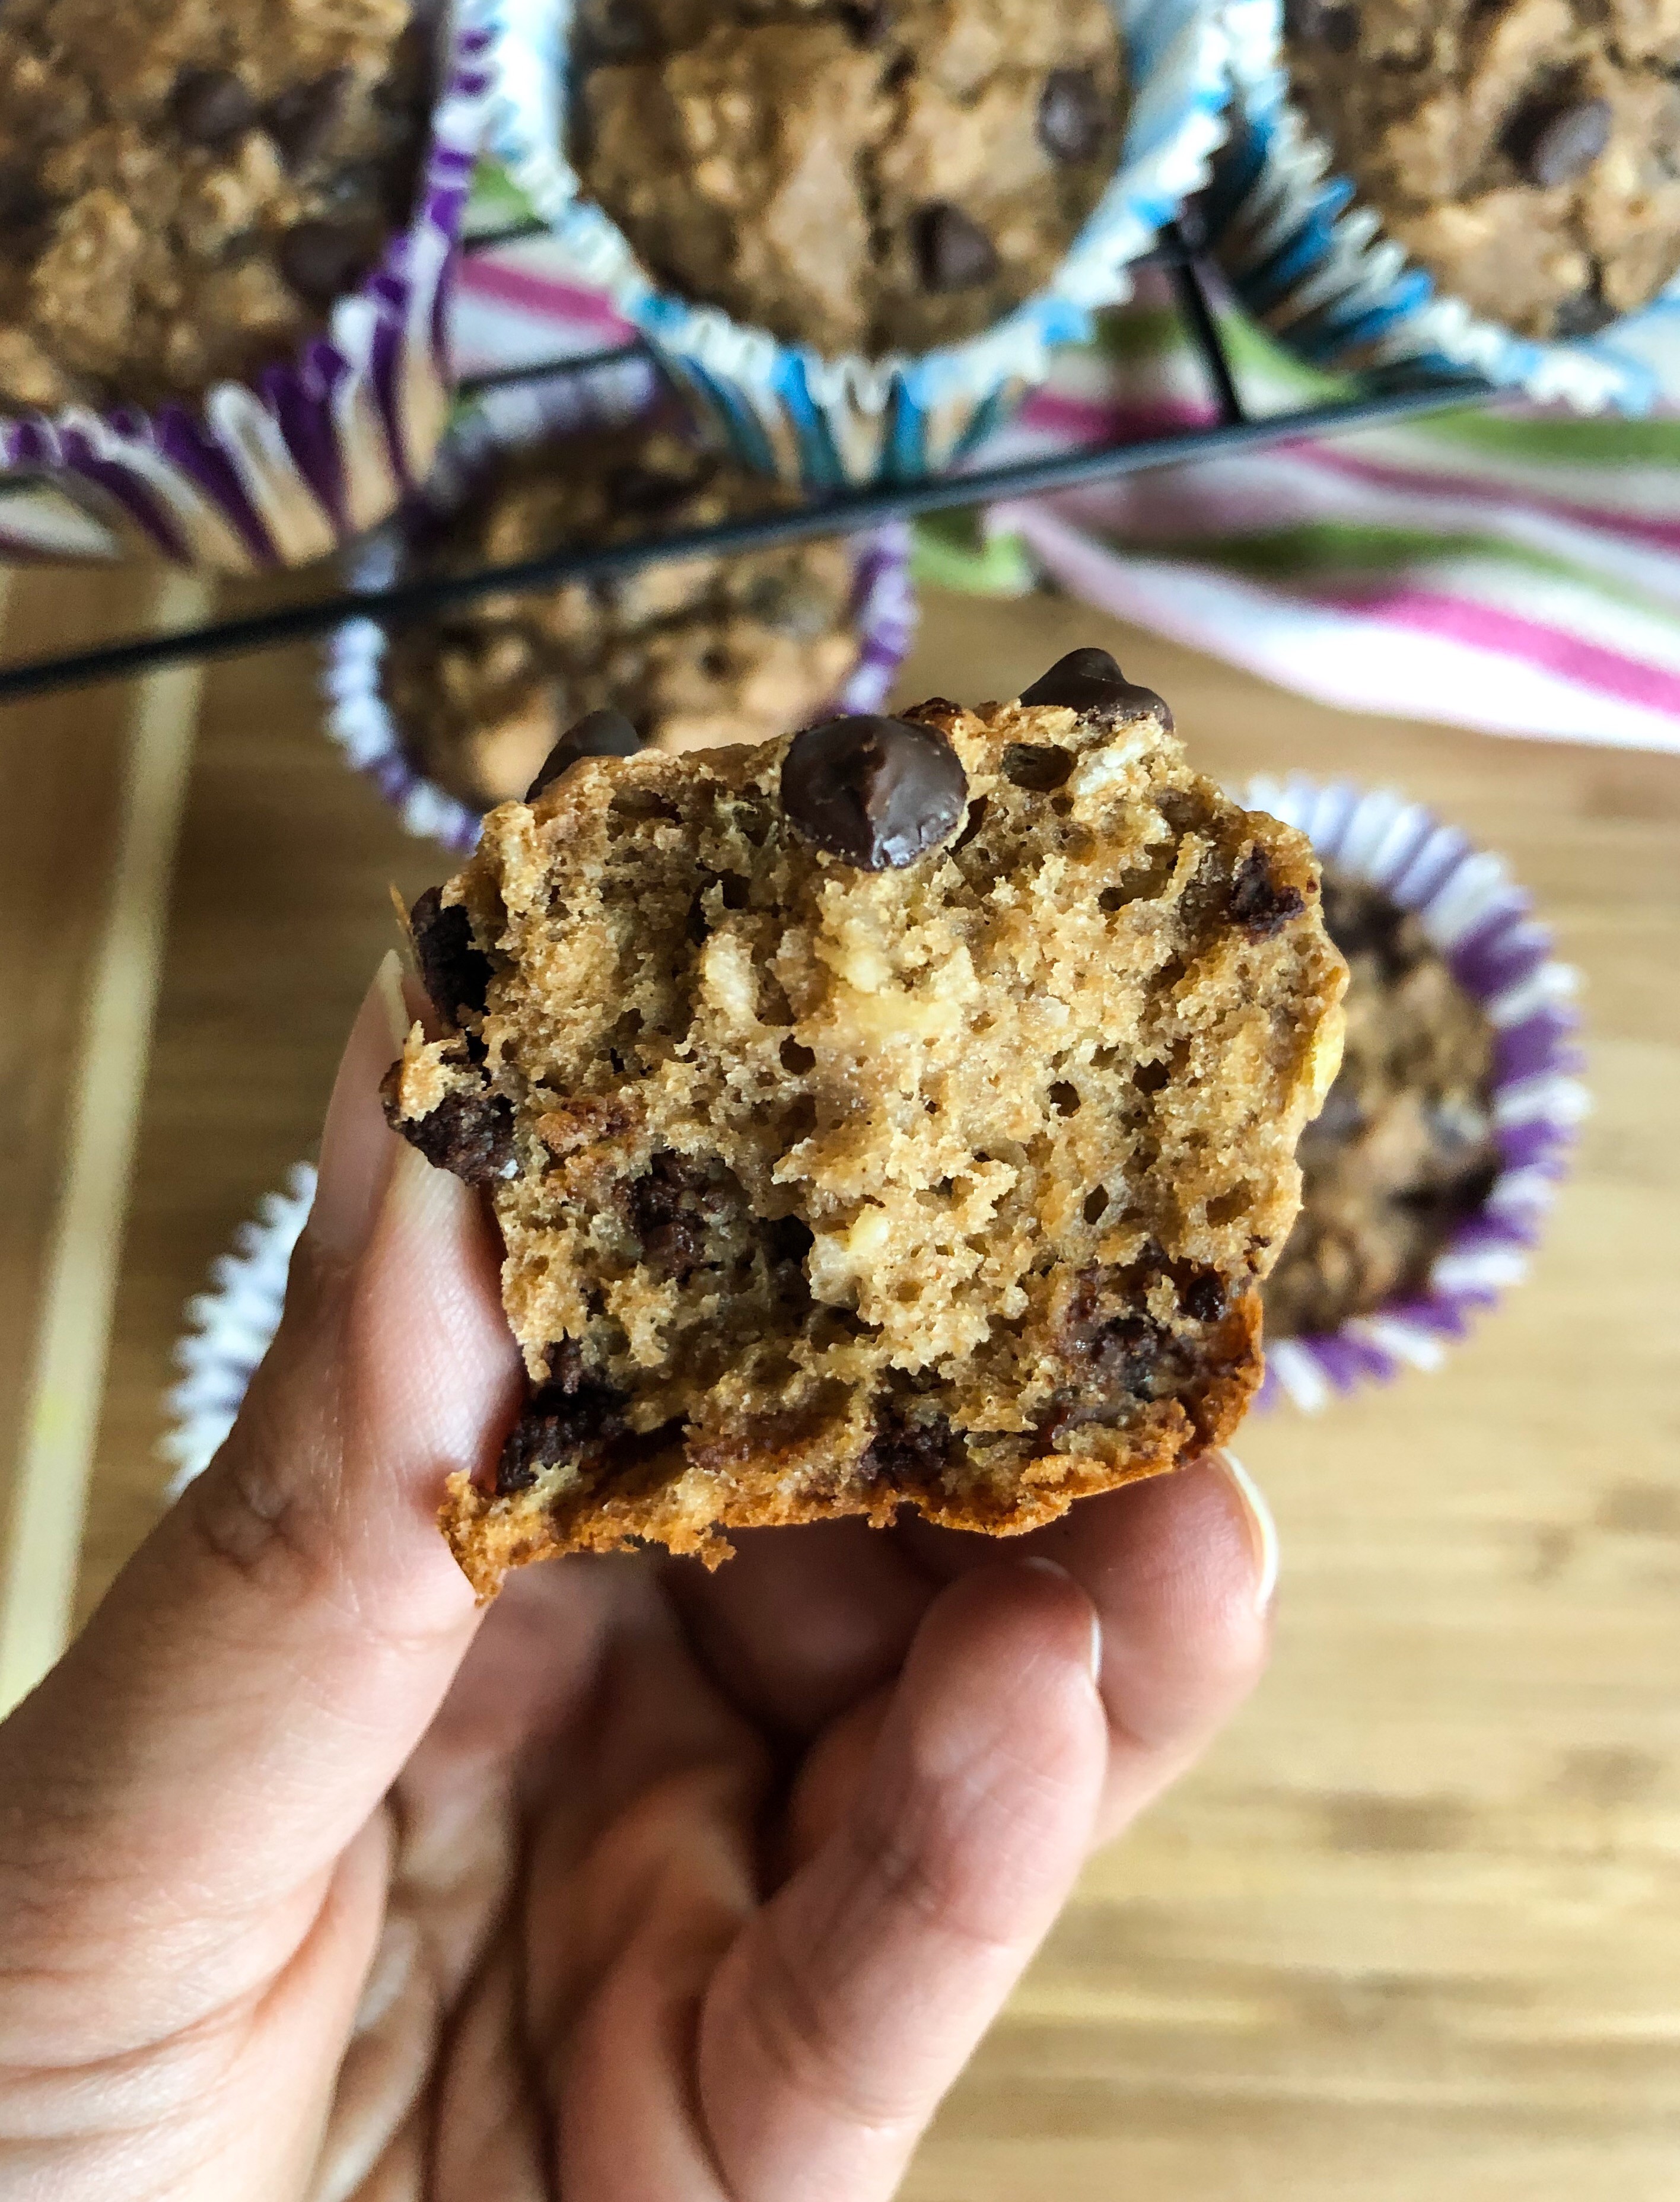 Healthy chocolate chip banana and oat muffins made with whole wheat flour and greek yogurt